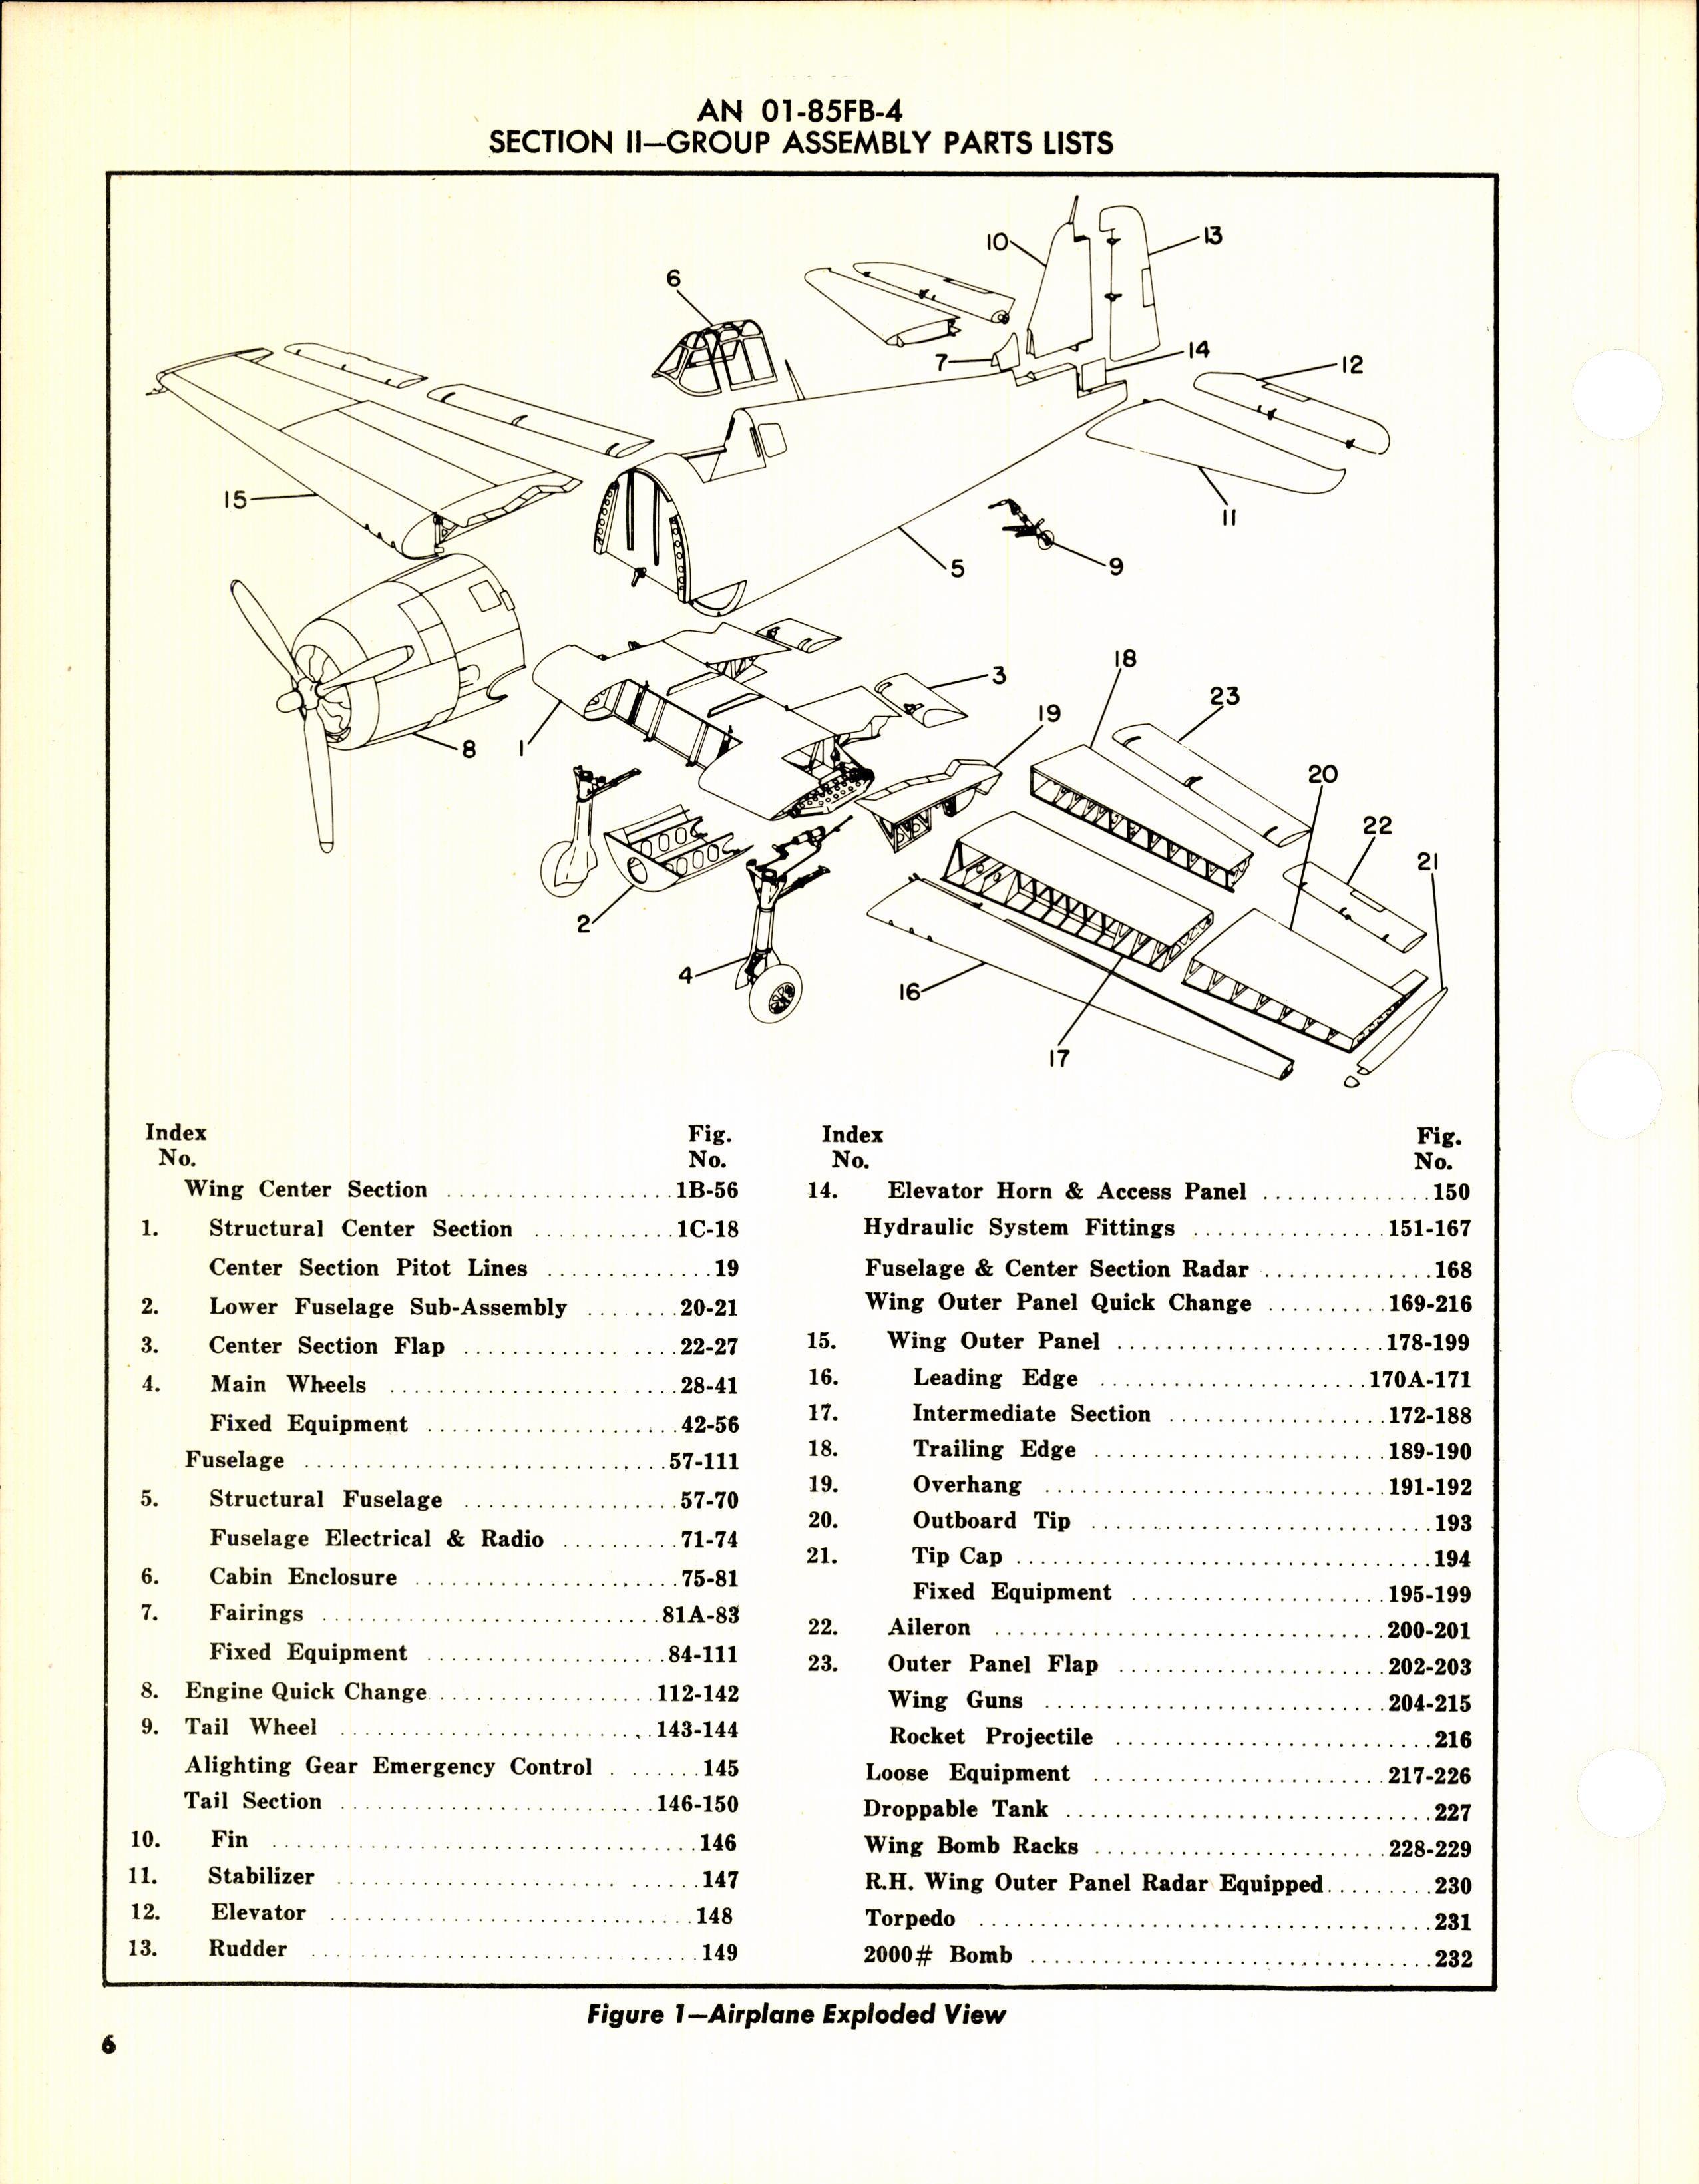 Sample page 18 from AirCorps Library document: Parts Catalog for F6F-3, F6F-3N, F6F-5, and F6F-5N